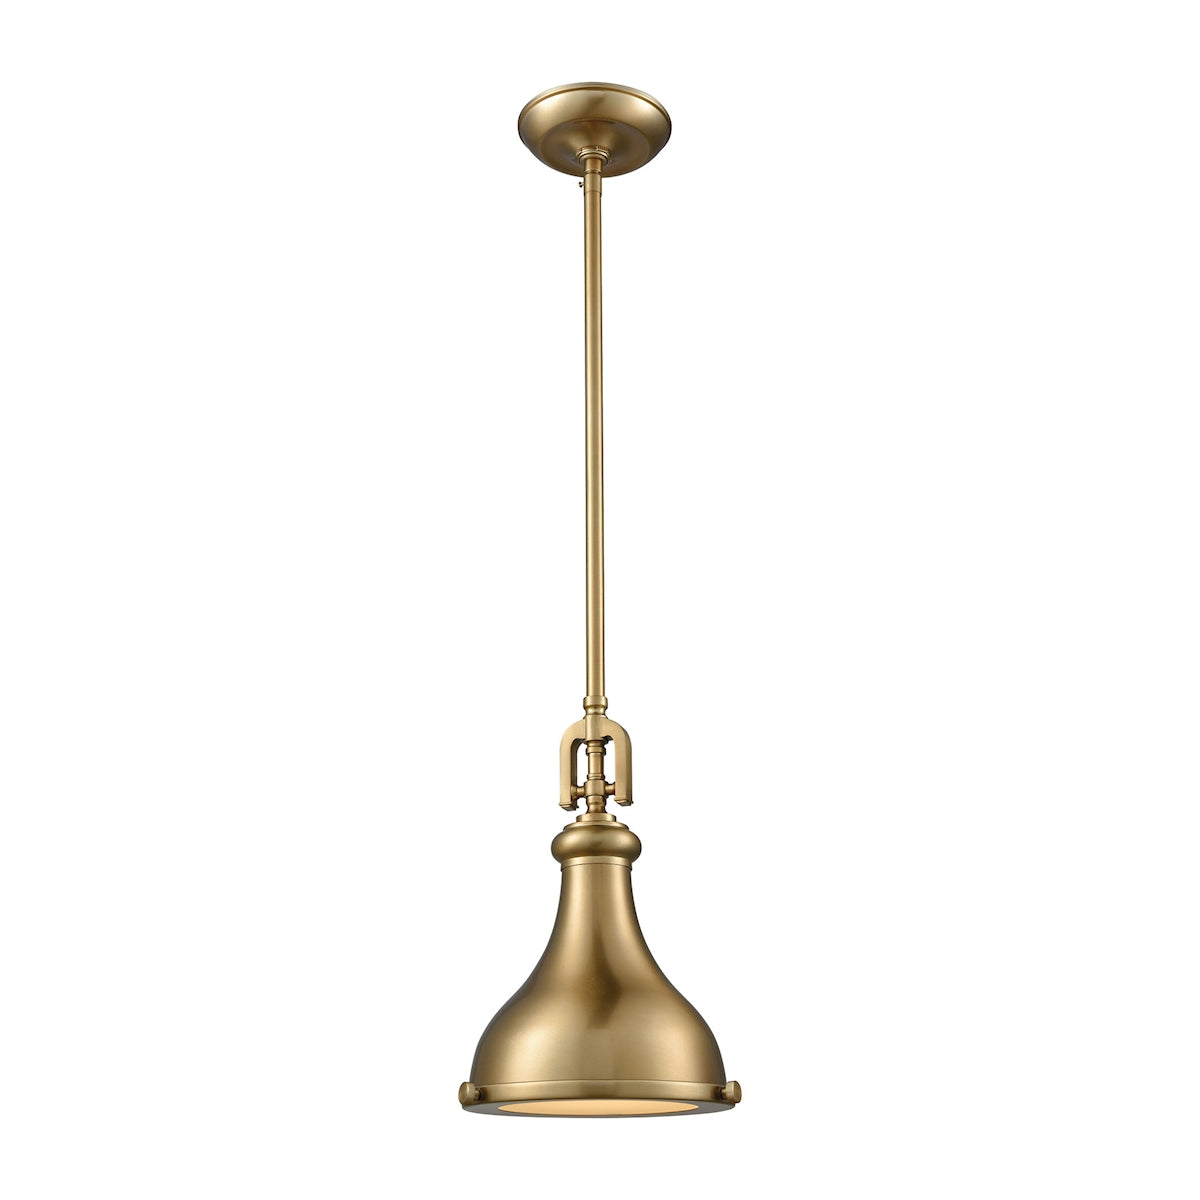 ELK Lighting 57070/1 Rutherford 1-Light Mini Pendant in Satin Brass with Metal Shade